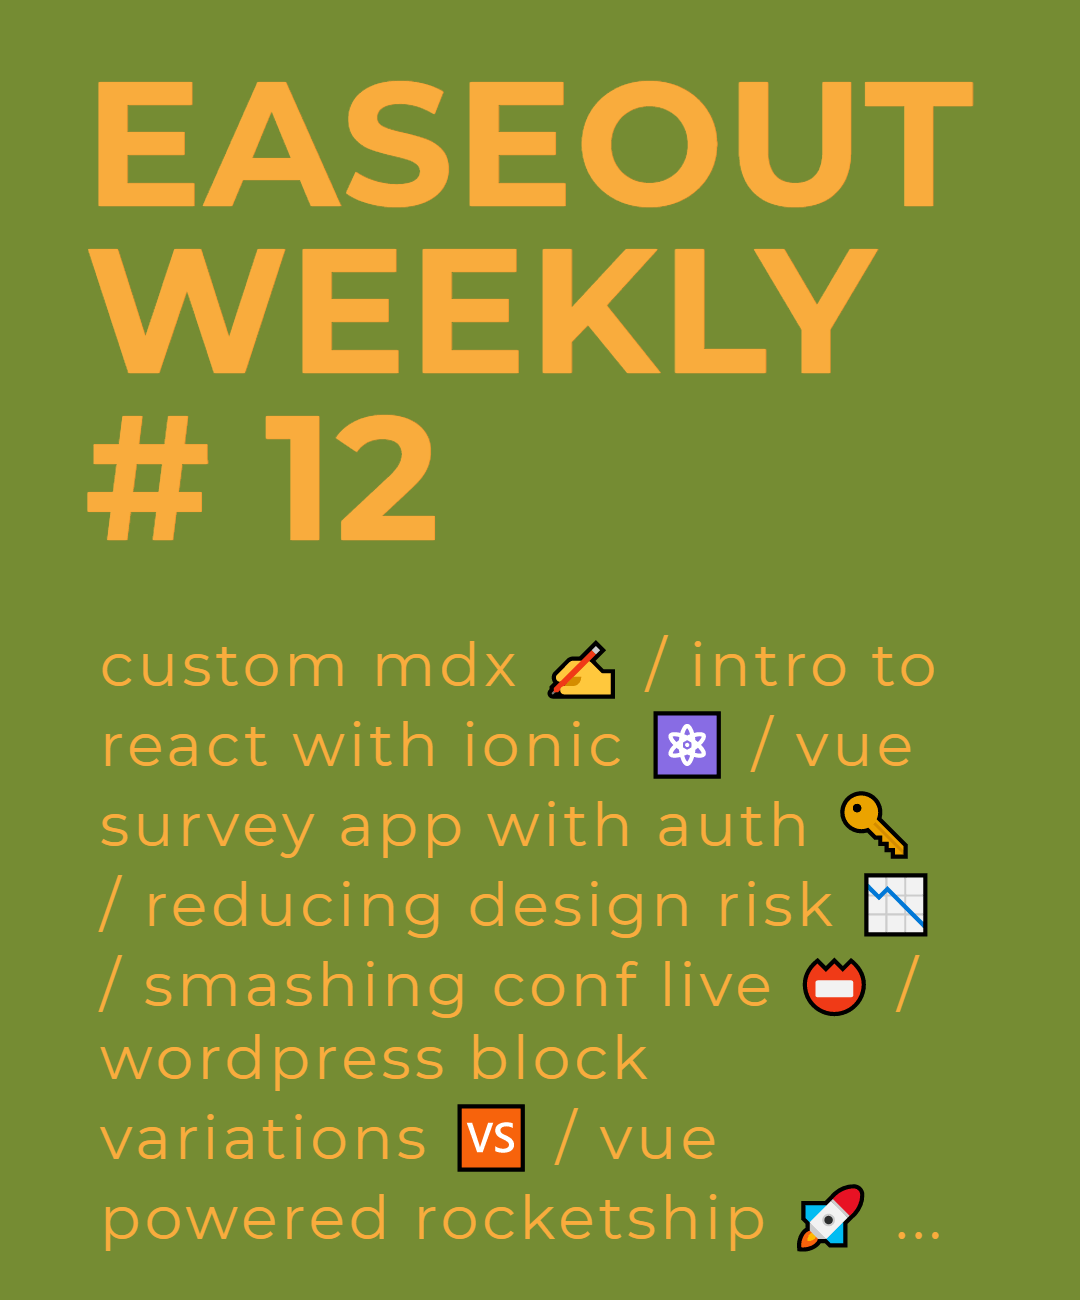 Easeout Weekly #12